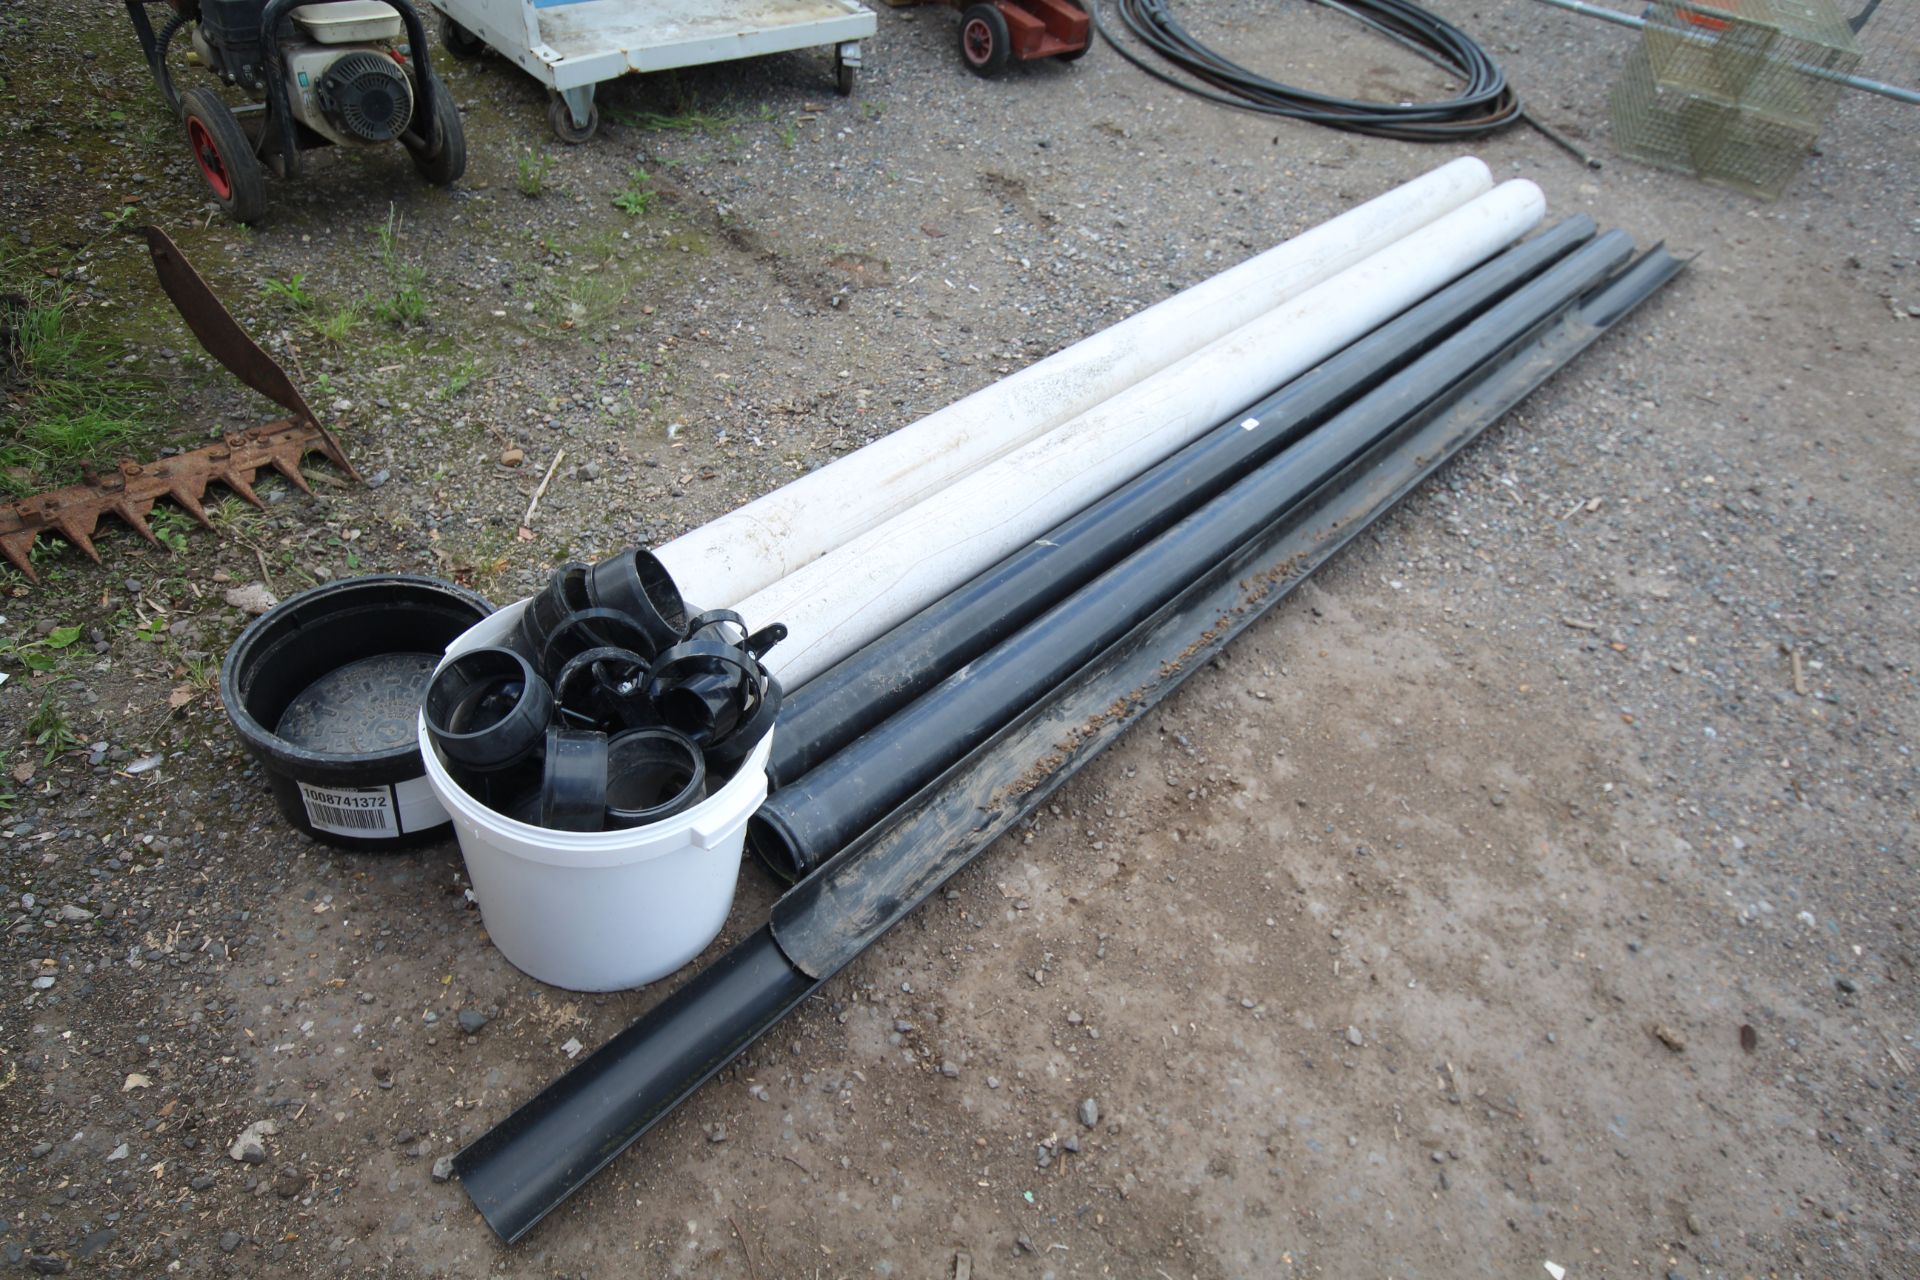 Various guttering, drainage pipe etc. For sale due